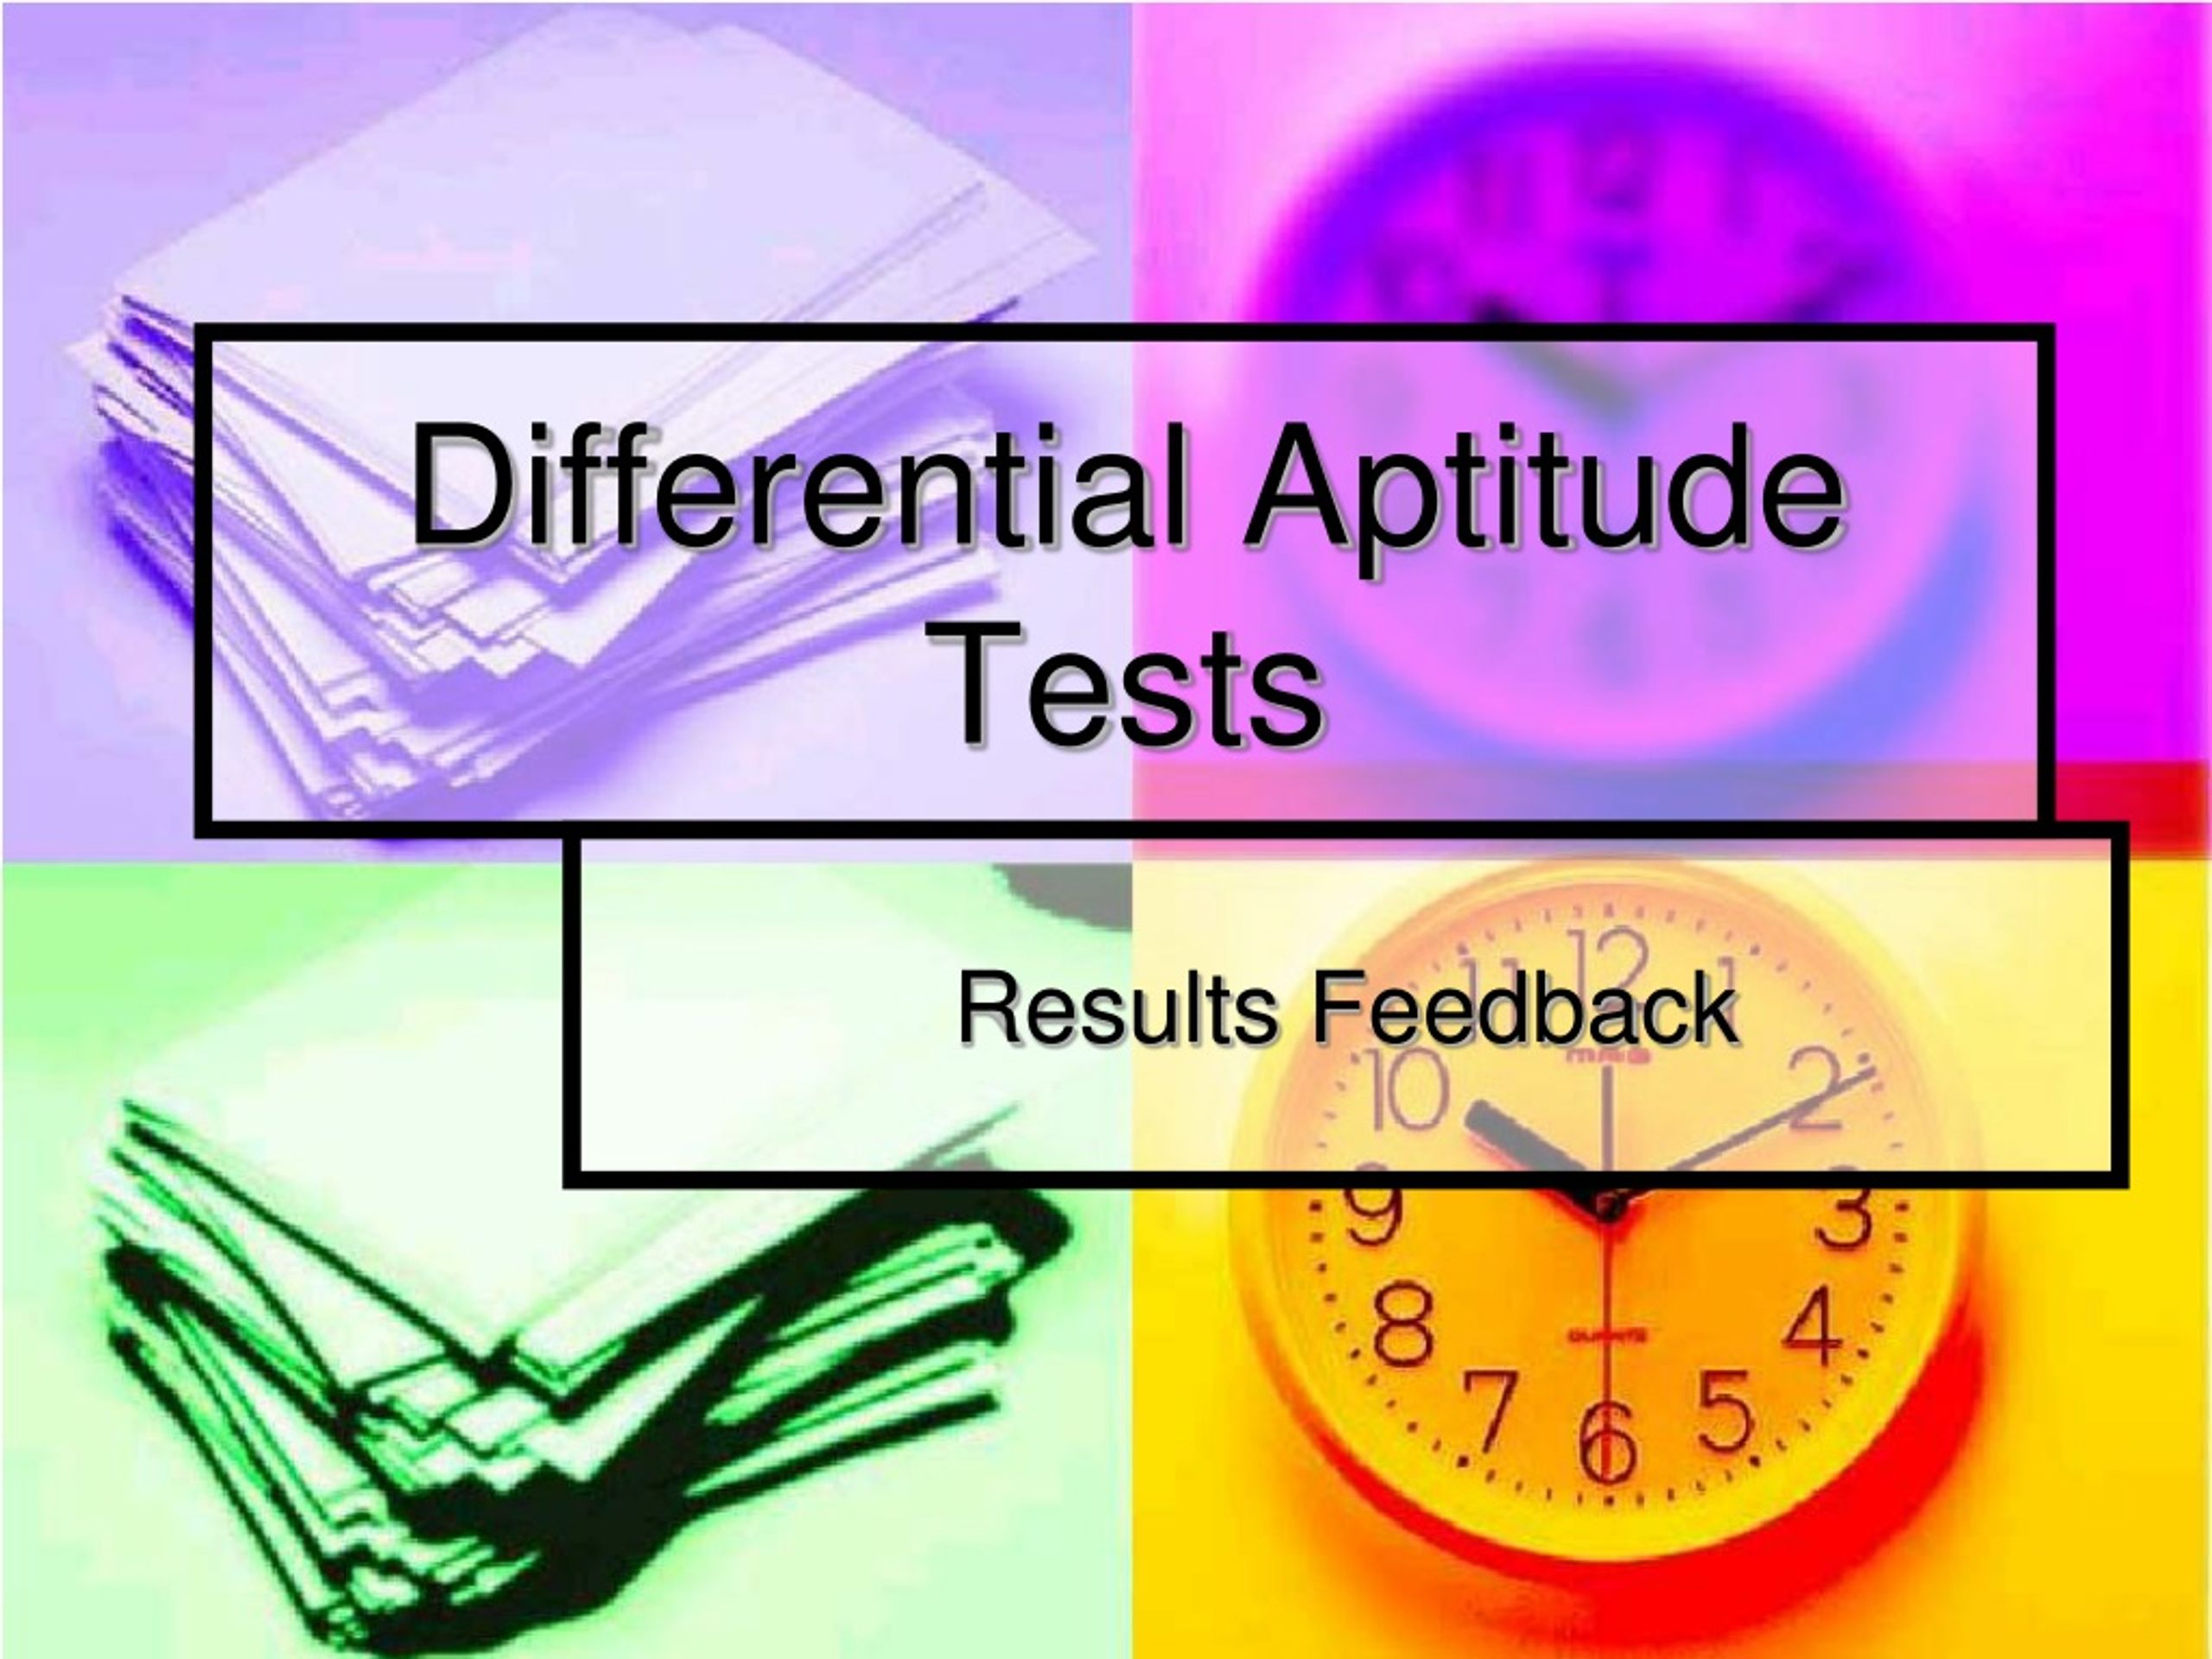 ppt-differential-aptitude-tests-powerpoint-presentation-free-download-id-159899